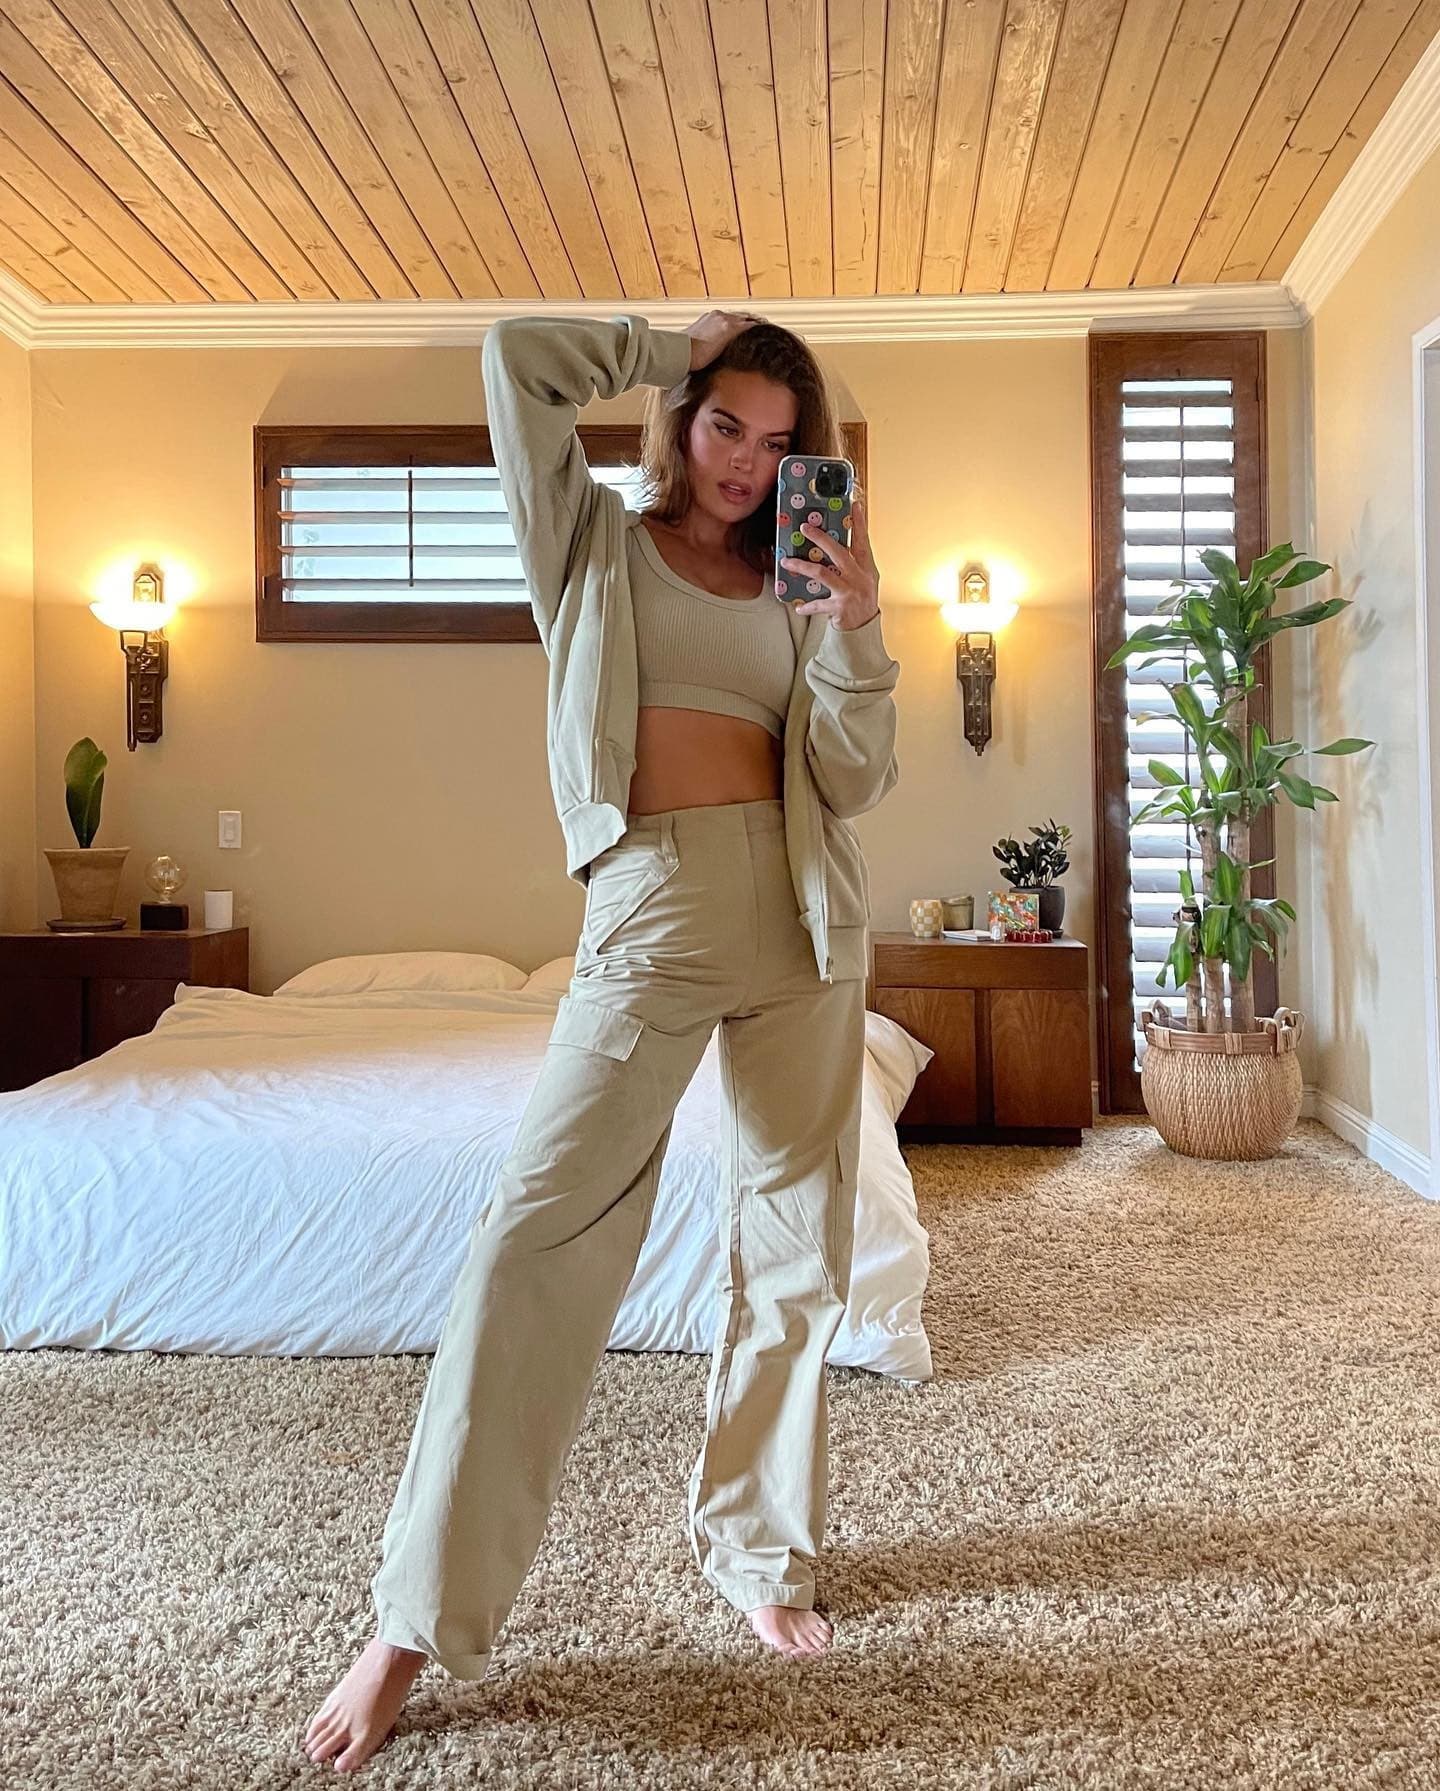 @stormibree wearing a pair of tan trousers with a sports bra and oversized zip-up hoodie while posing for a mirror picture within a bedroom. 